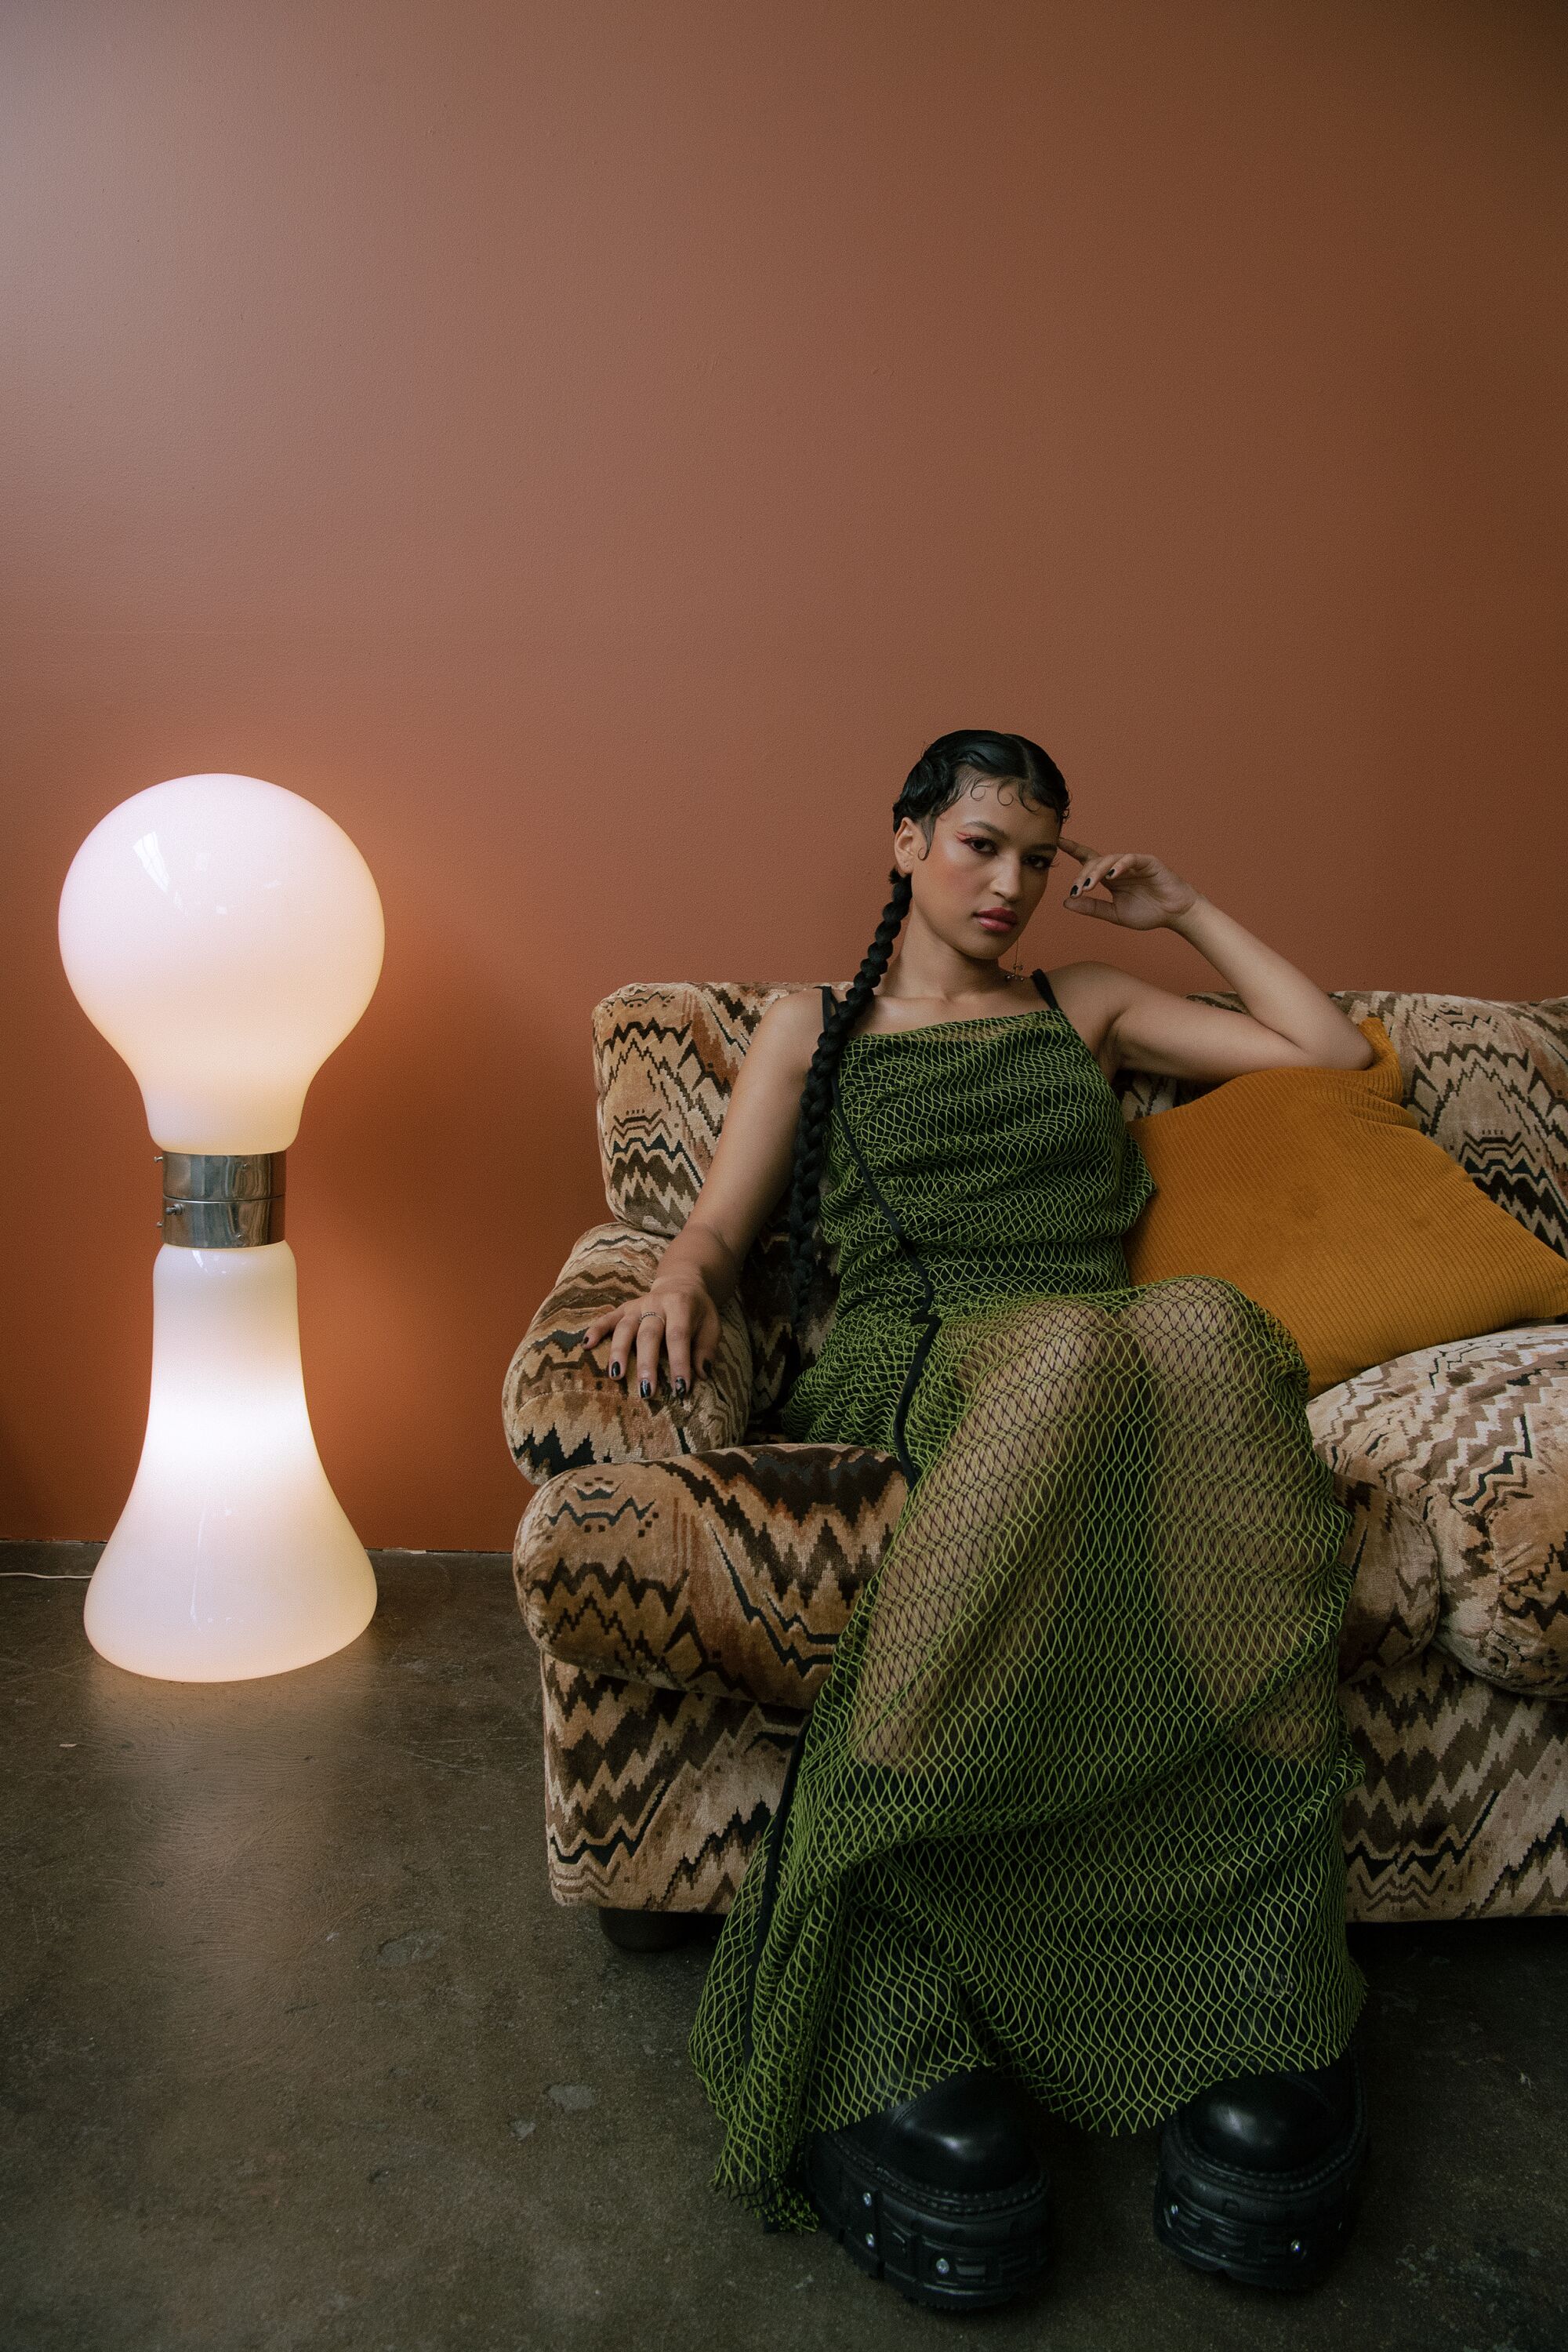 A model in a green dress lounges on a couch next to a glowing floor lamp.